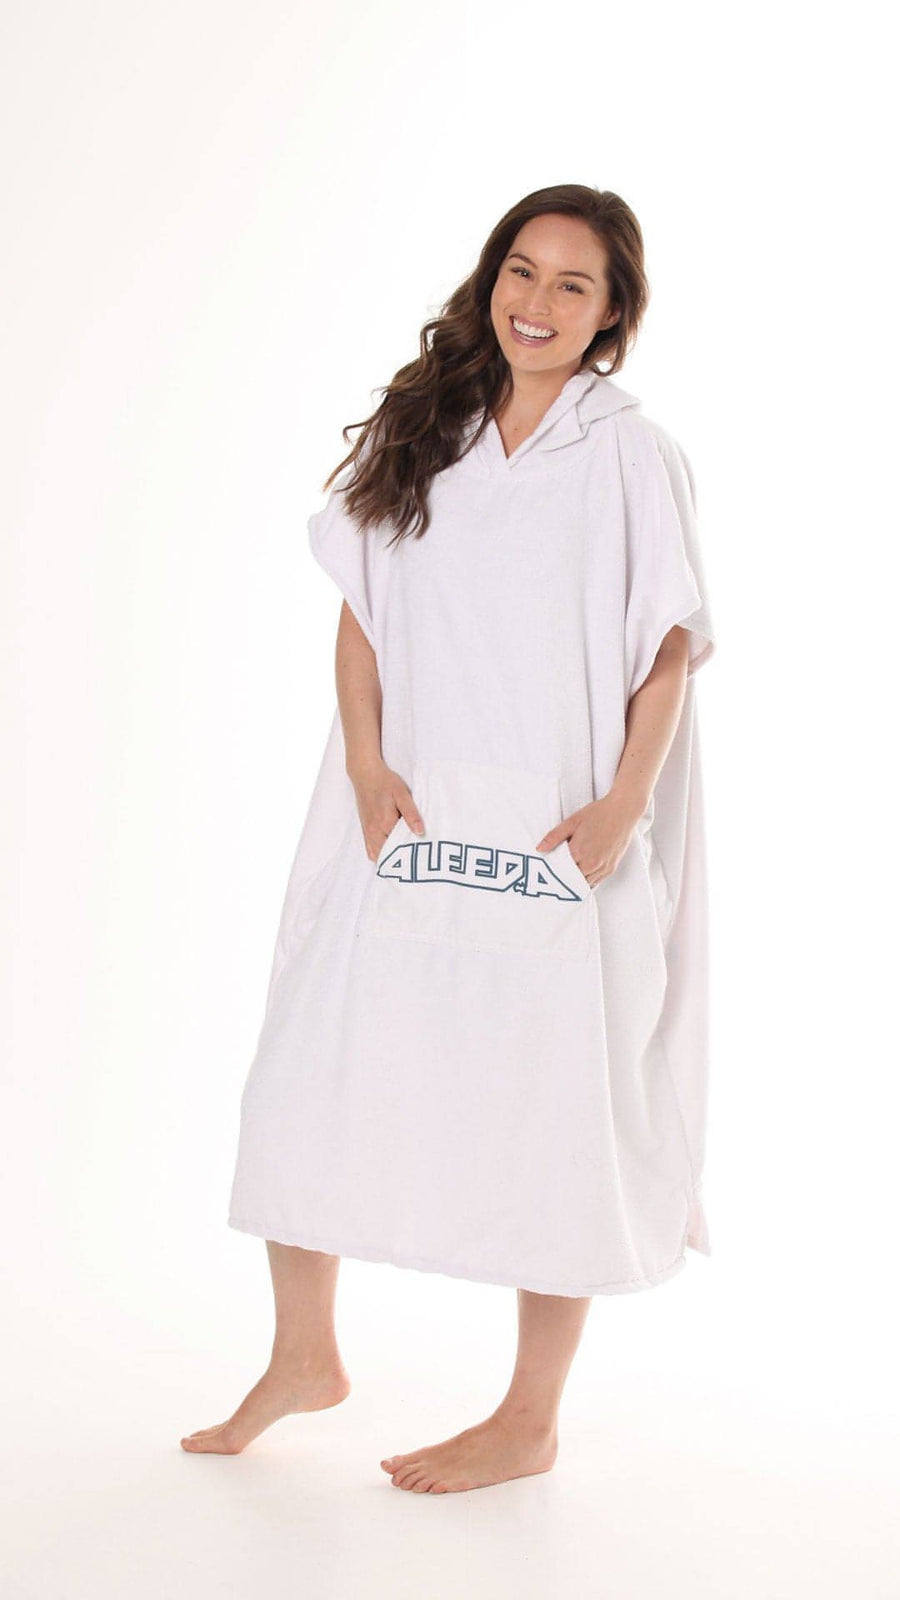 Hooded Towel - Mens, Womens, Unisex Adult White front